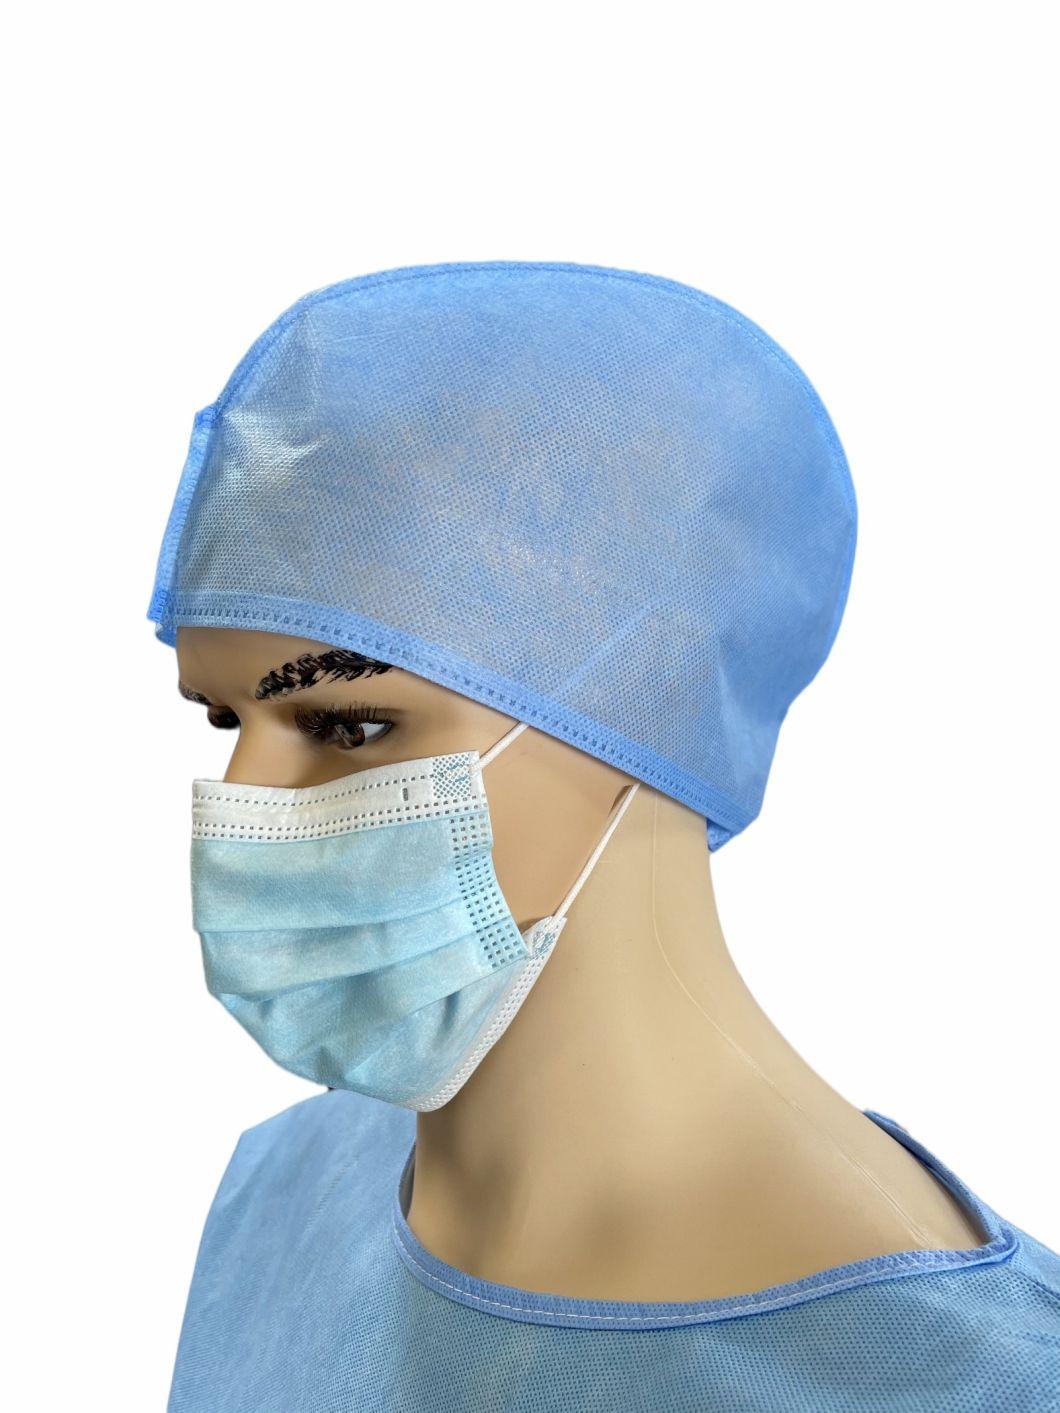 Anti-Slip Disposable Doctor Cap Surgical Doctor Cap for Free Sample